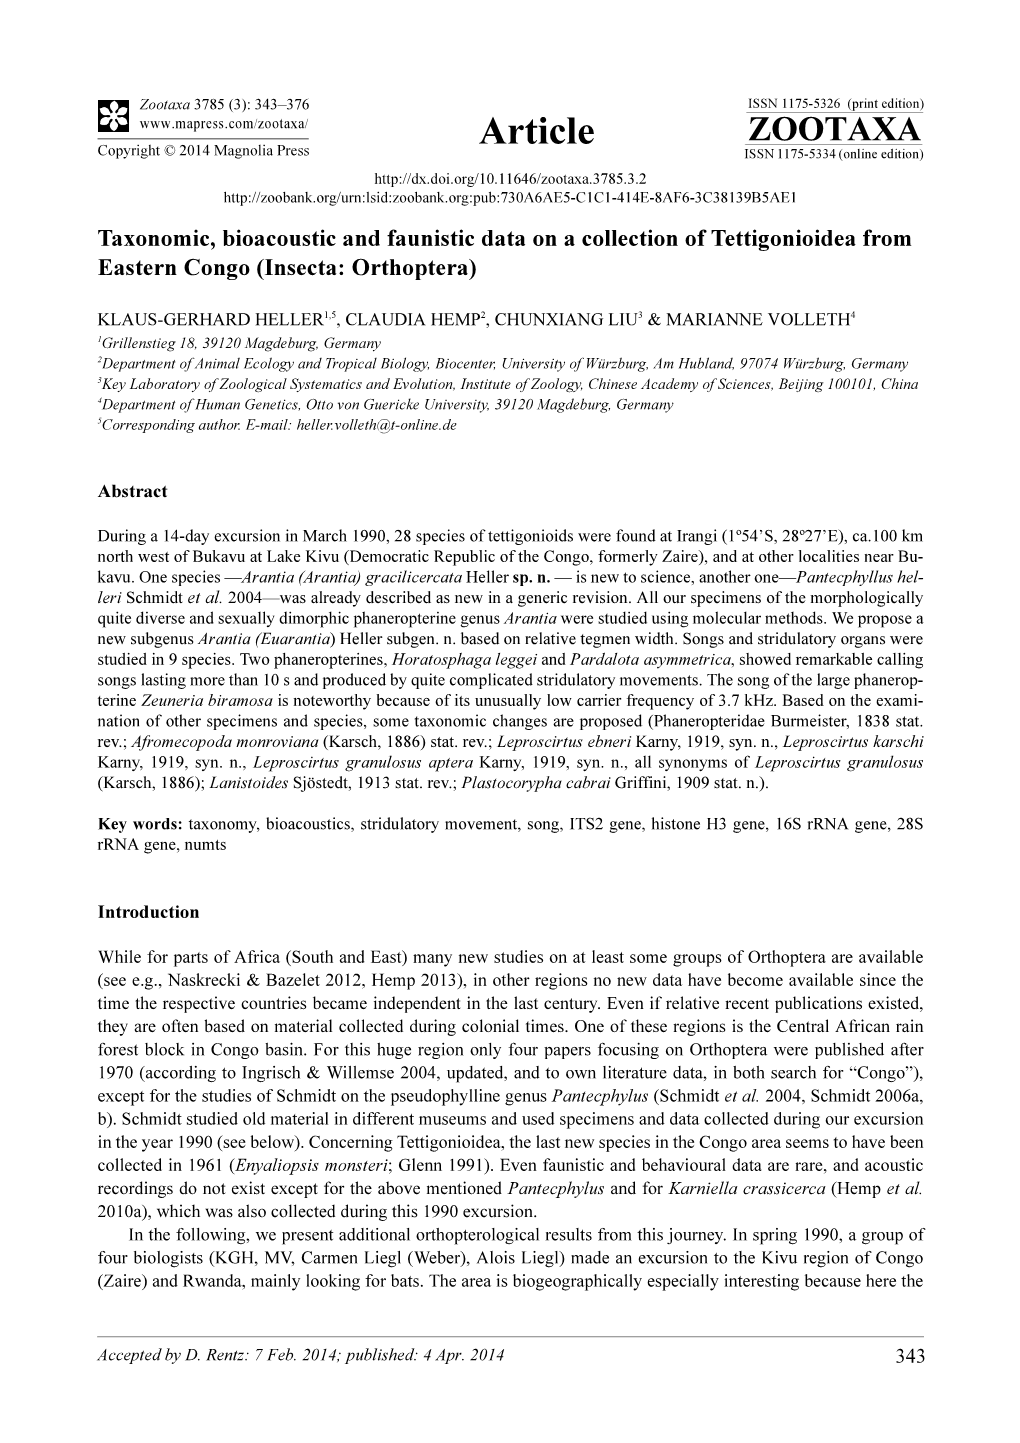 Taxonomic, Bioacoustic and Faunistic Data on a Collection of Tettigonioidea from Eastern Congo (Insecta: Orthoptera)